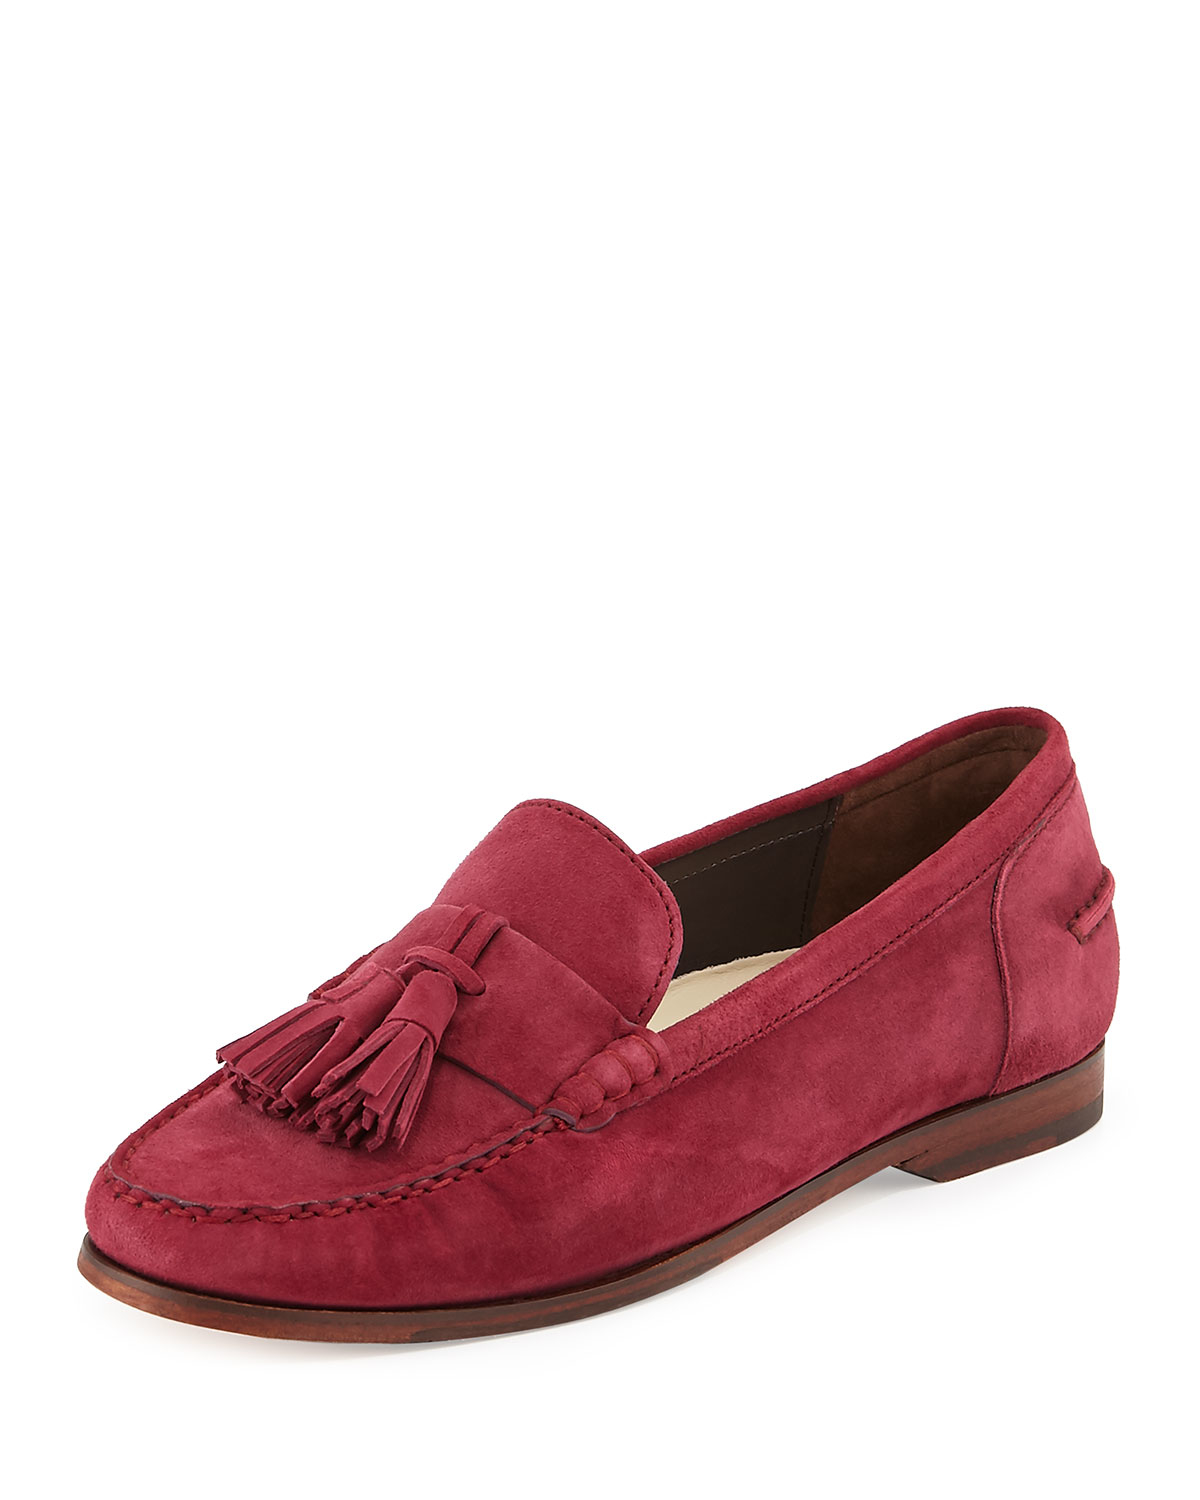 Lyst - Cole haan Pinch Grand Tassel Loafers in Red